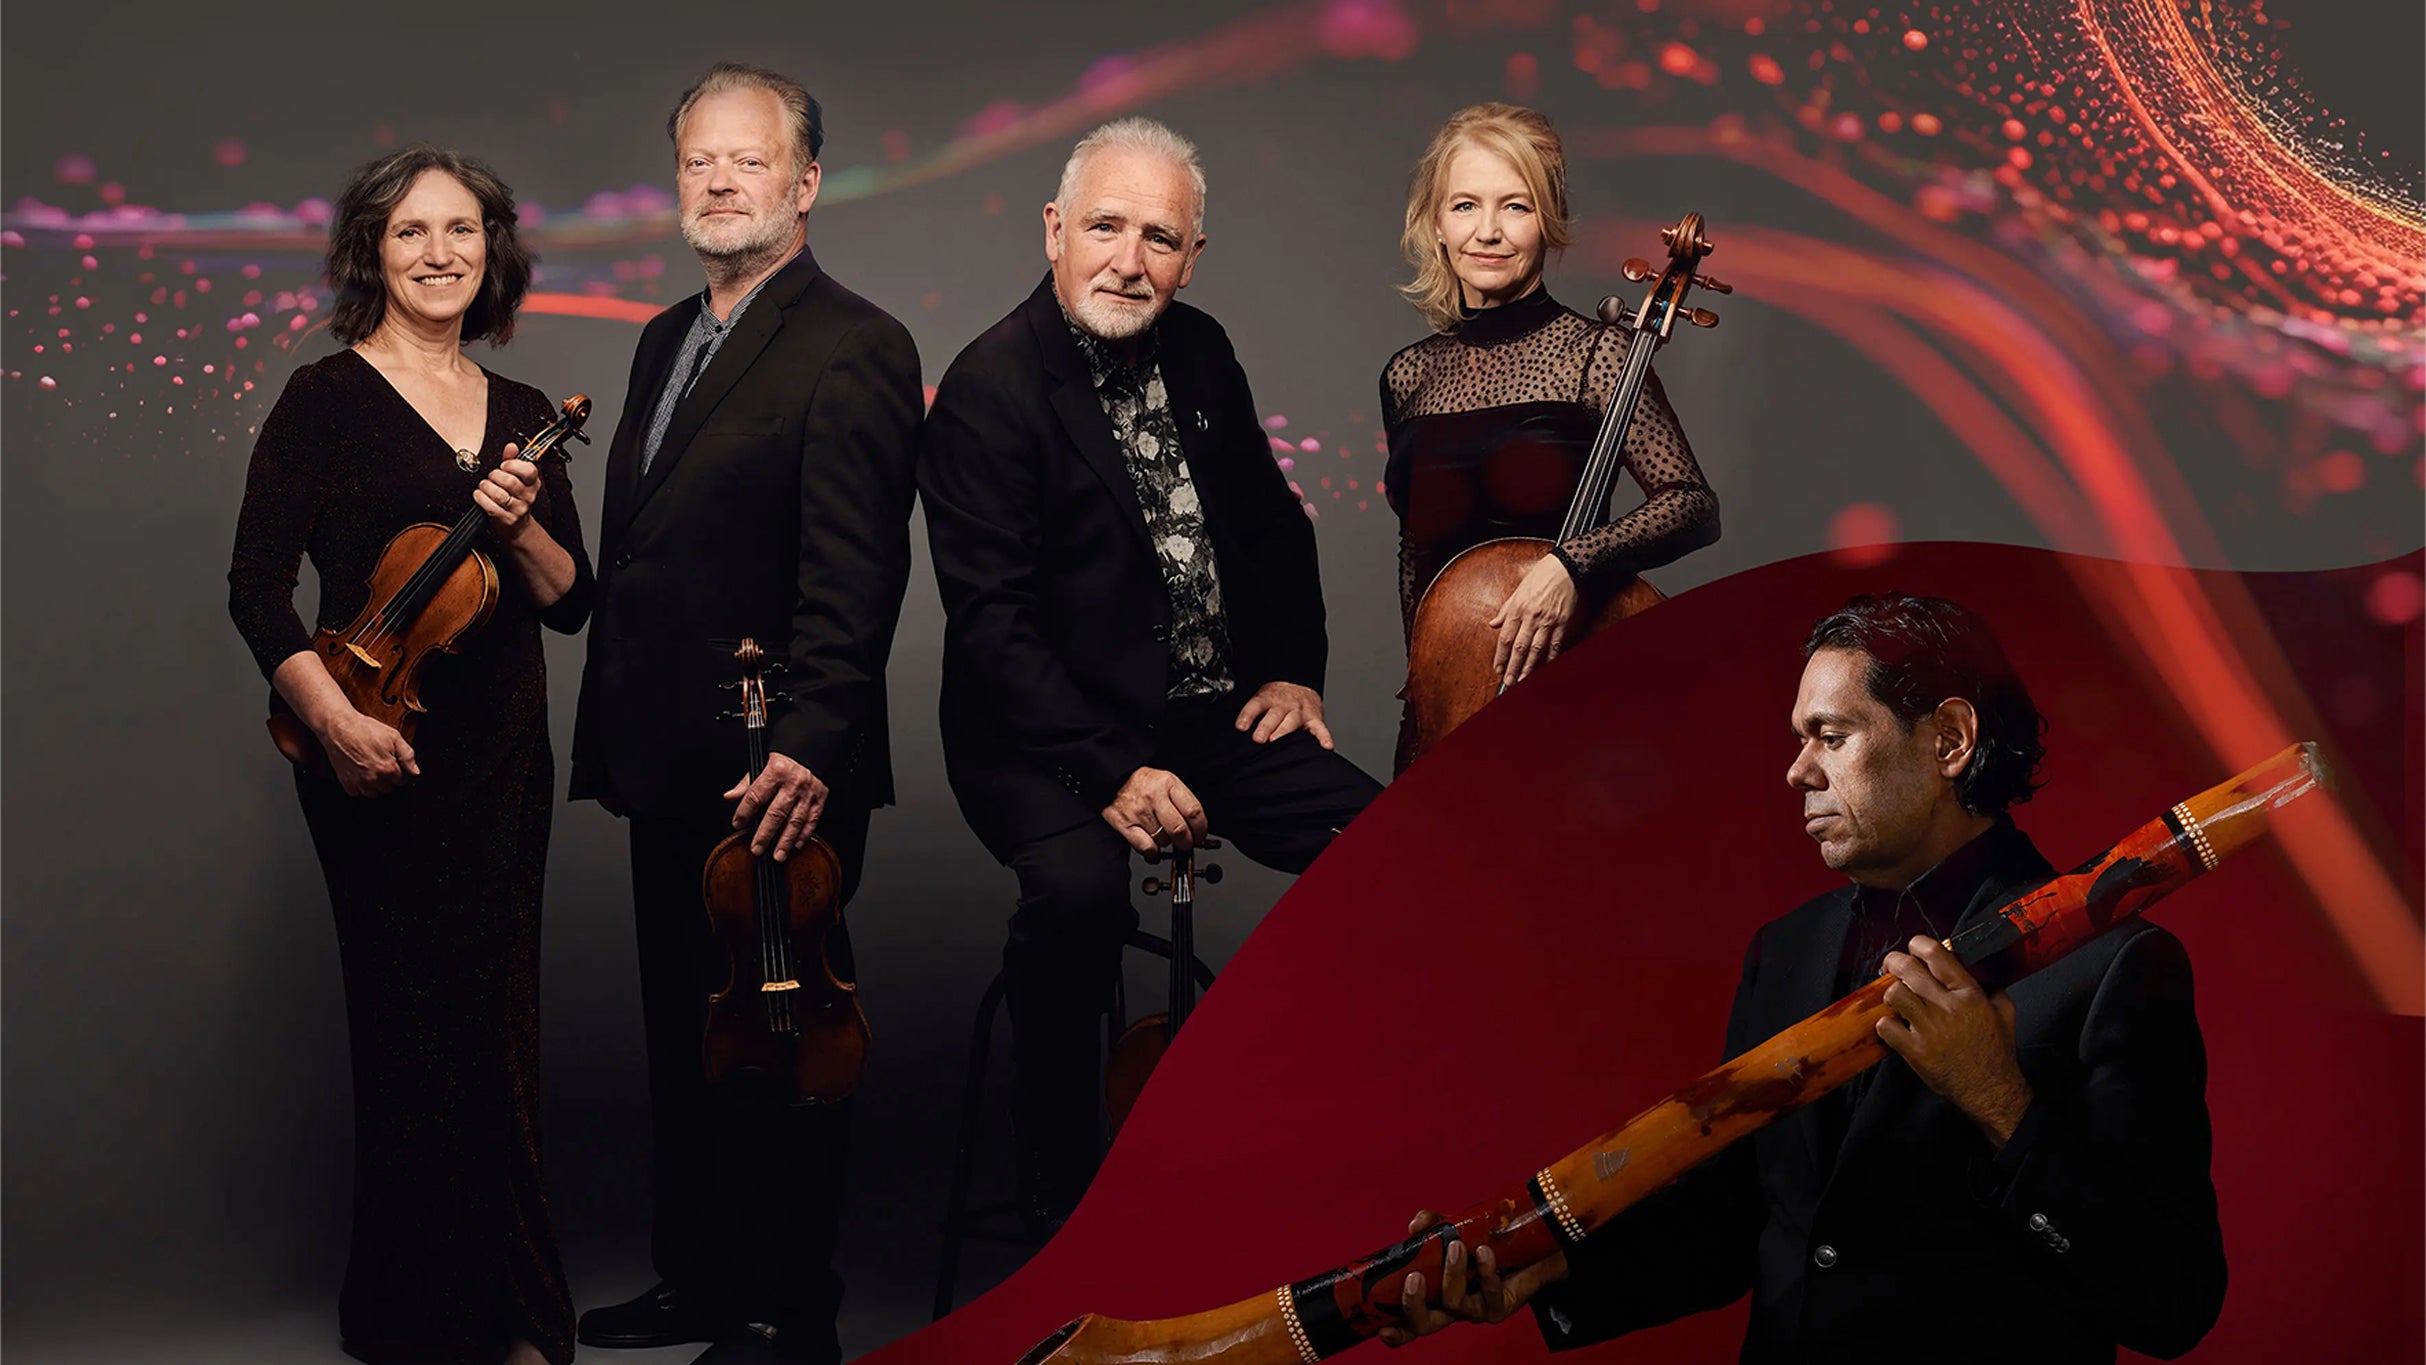 Image used with permission from Ticketmaster | Chamber Music NZ - Barton & Brodsky tickets